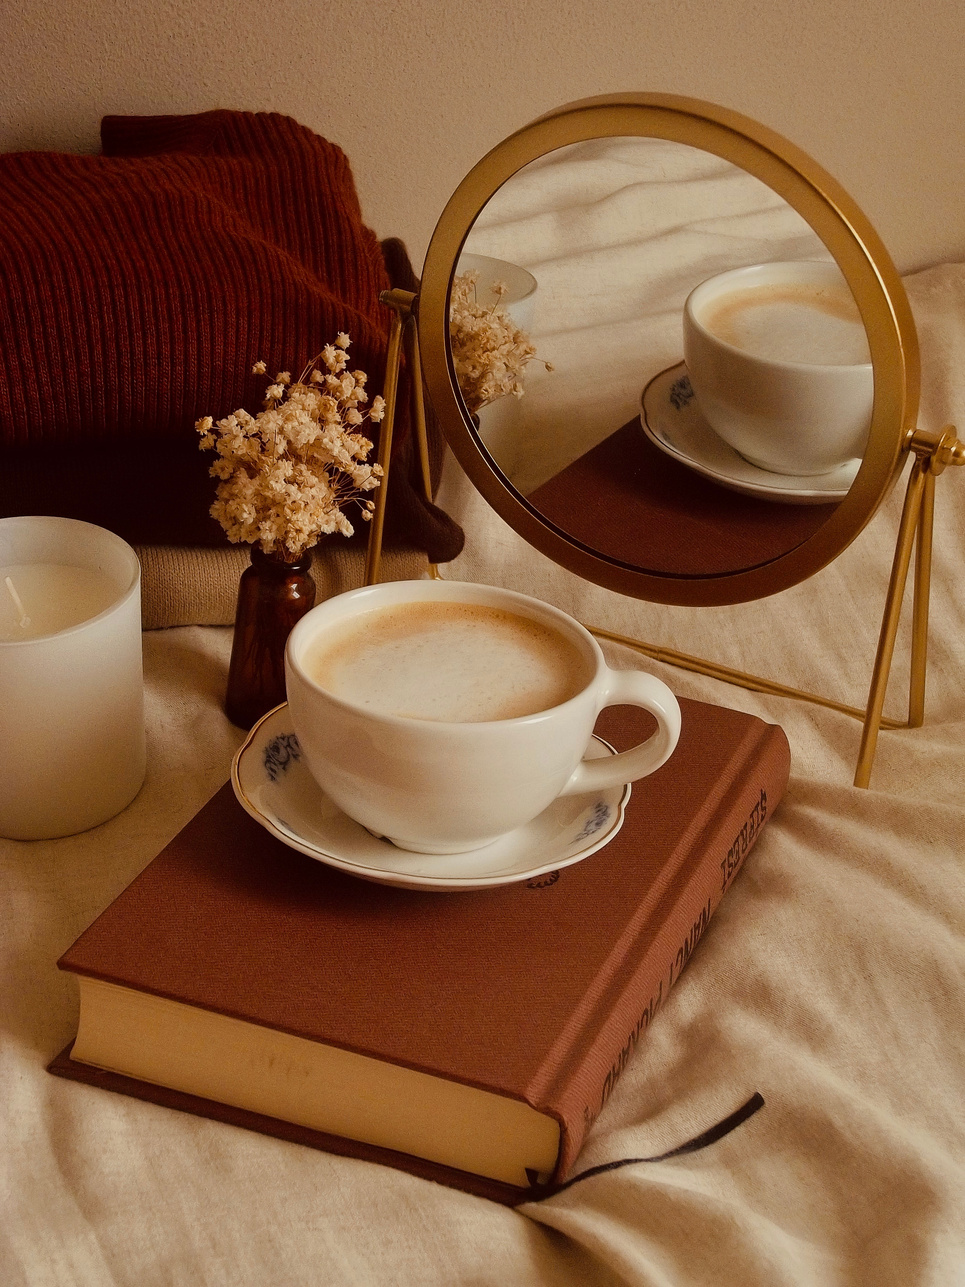 White Ceramic Teacup on Top of Book 